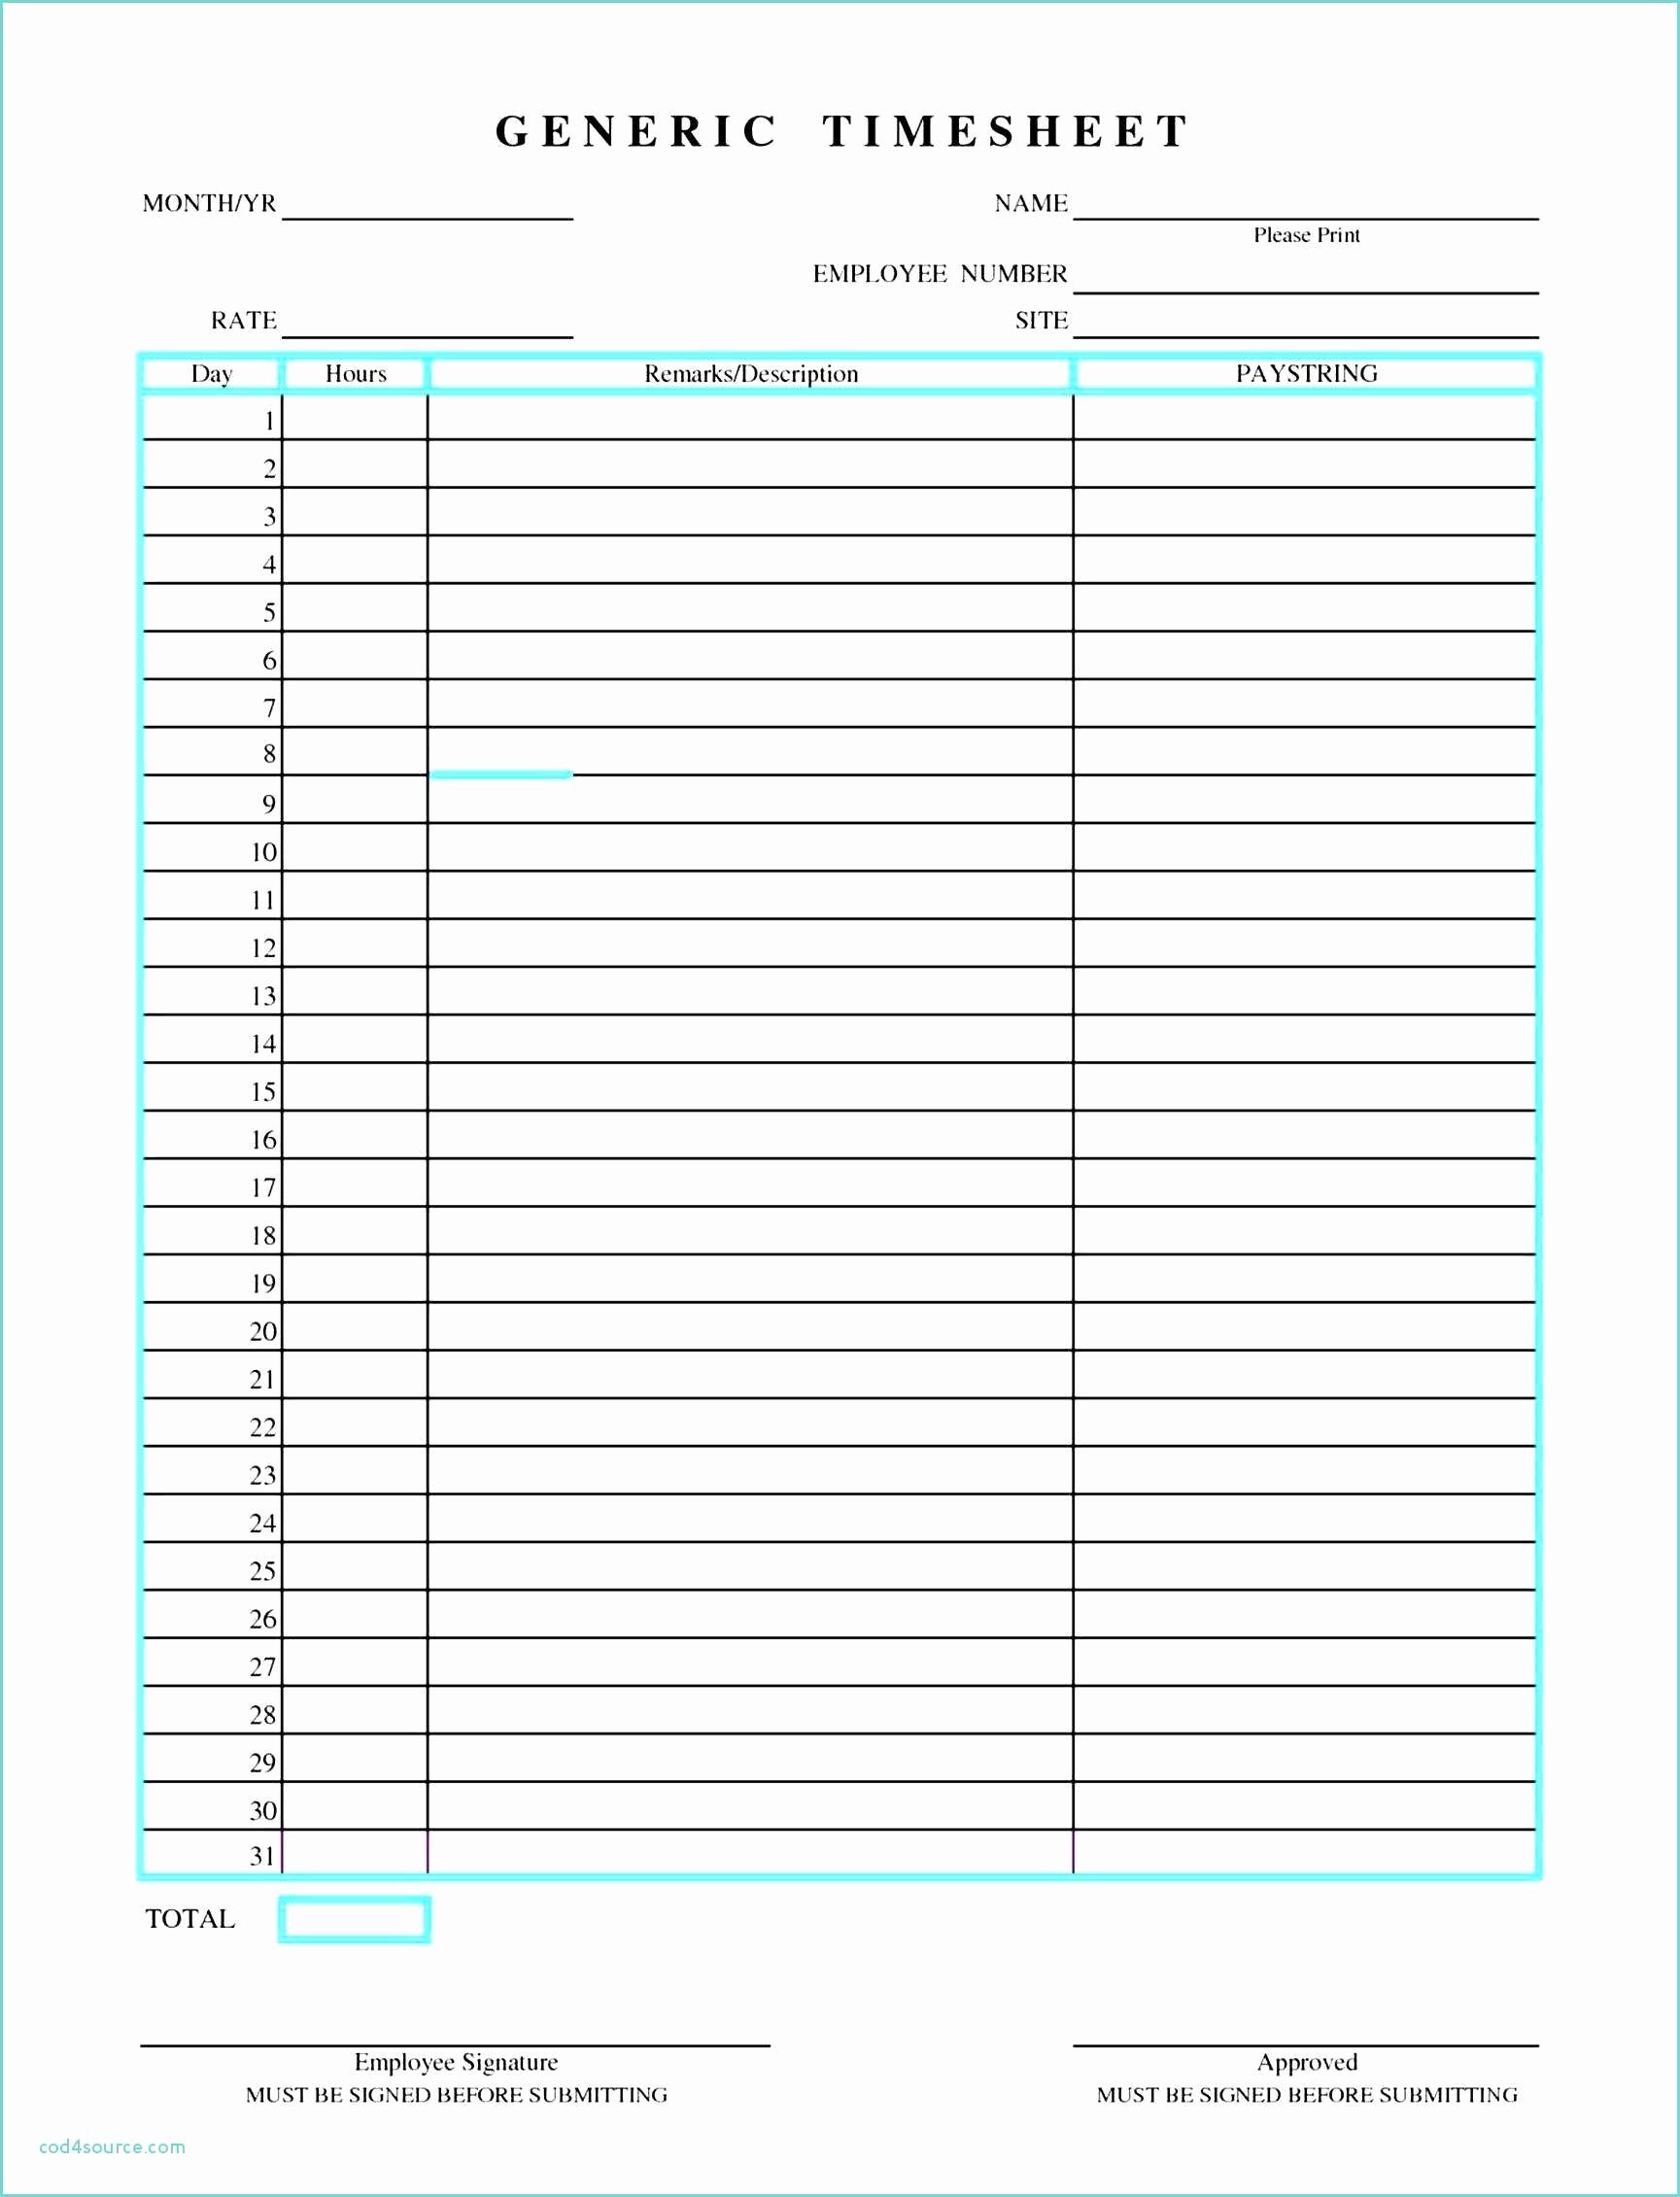 Timesheet Sign In and Out Luxury Weekly Timesheet Template Excel Excel Time Log Template